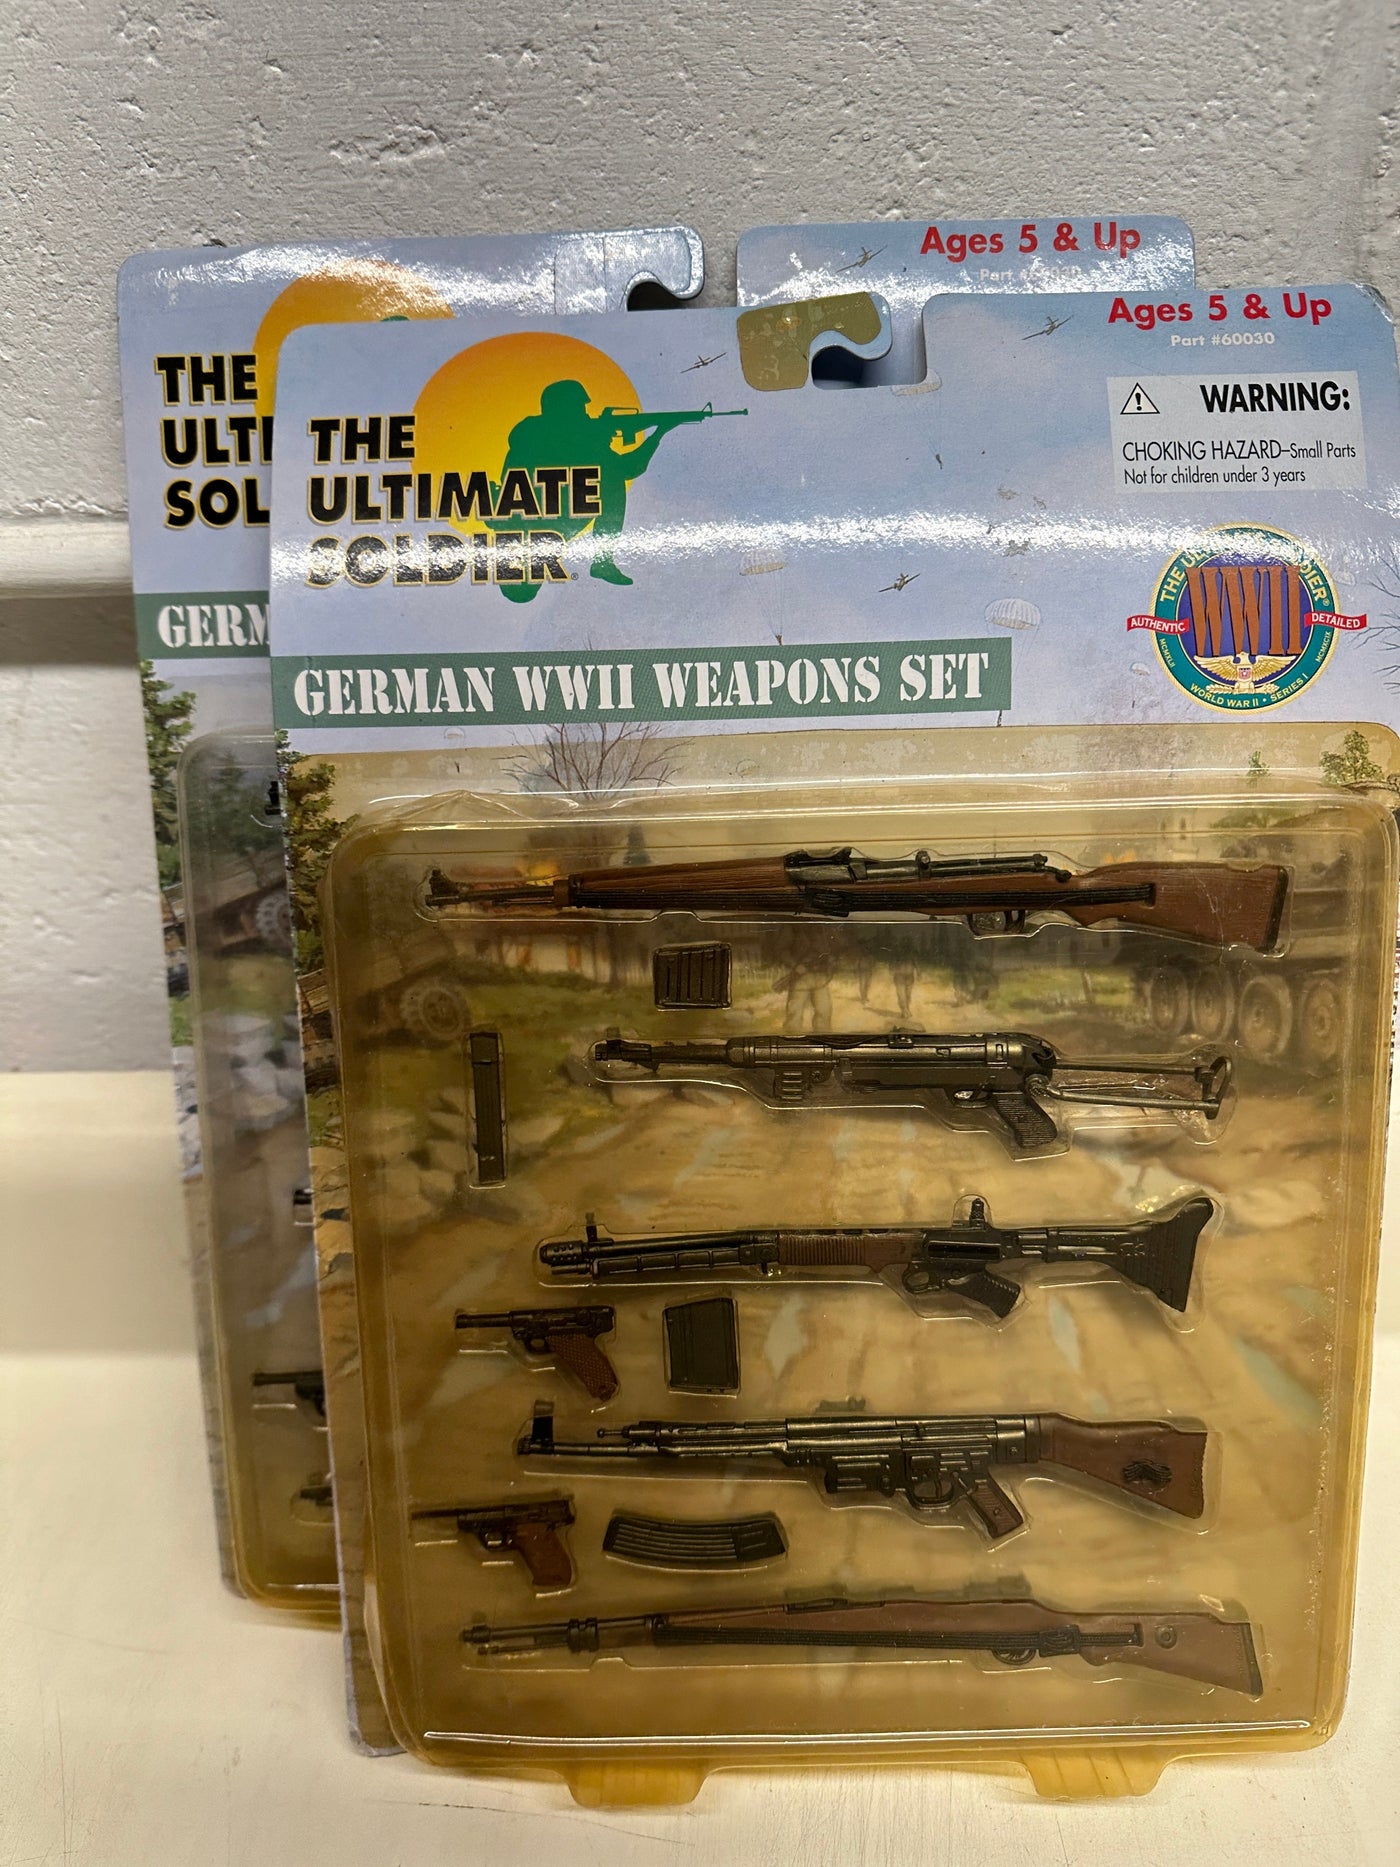 1/6th scale German WWII Weapons set, (2003 production)